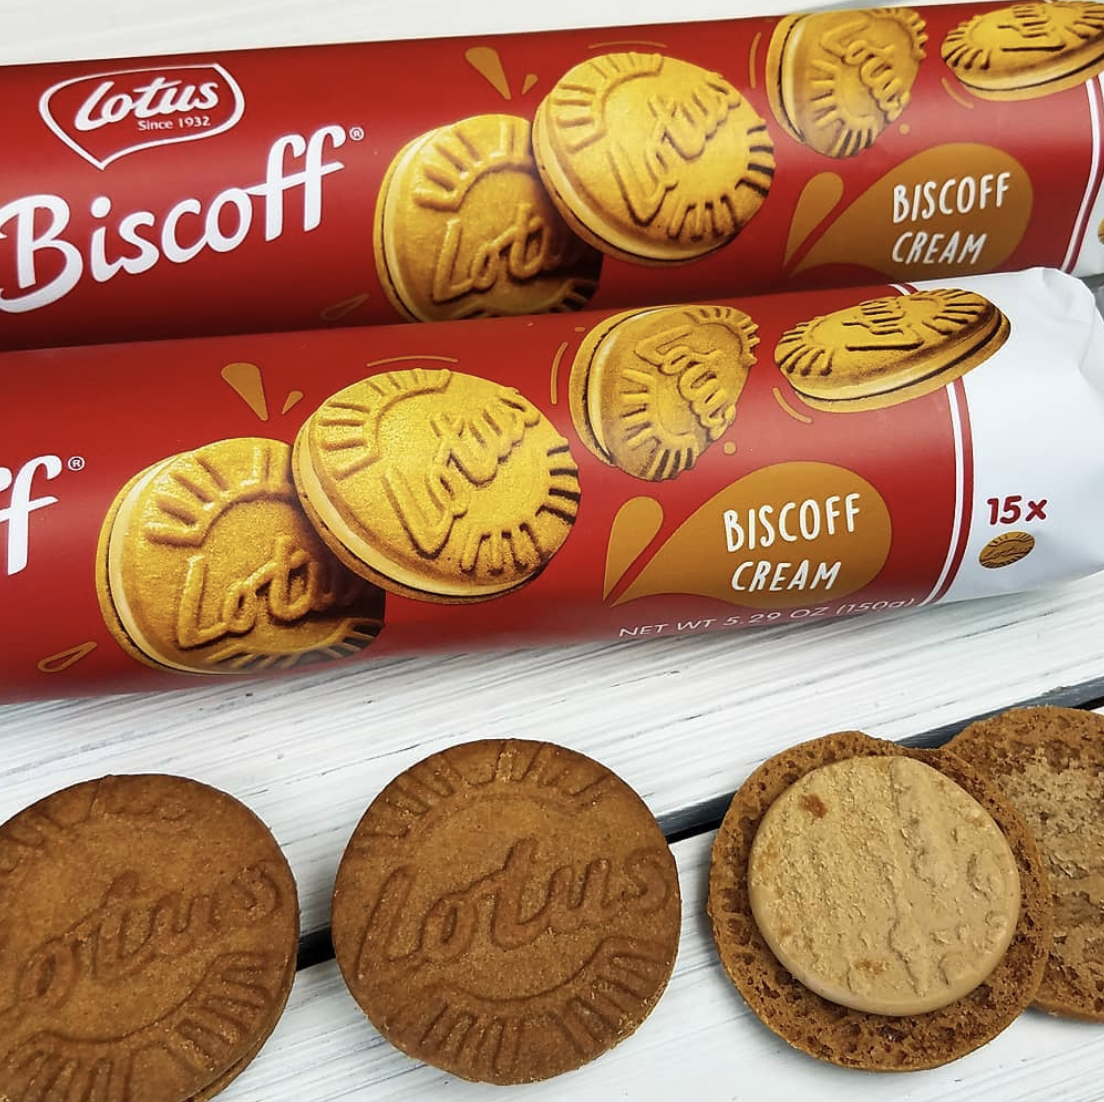 Biscoff Cookies Stuffed With Non-Dairy Cream Are Out In The U.S.